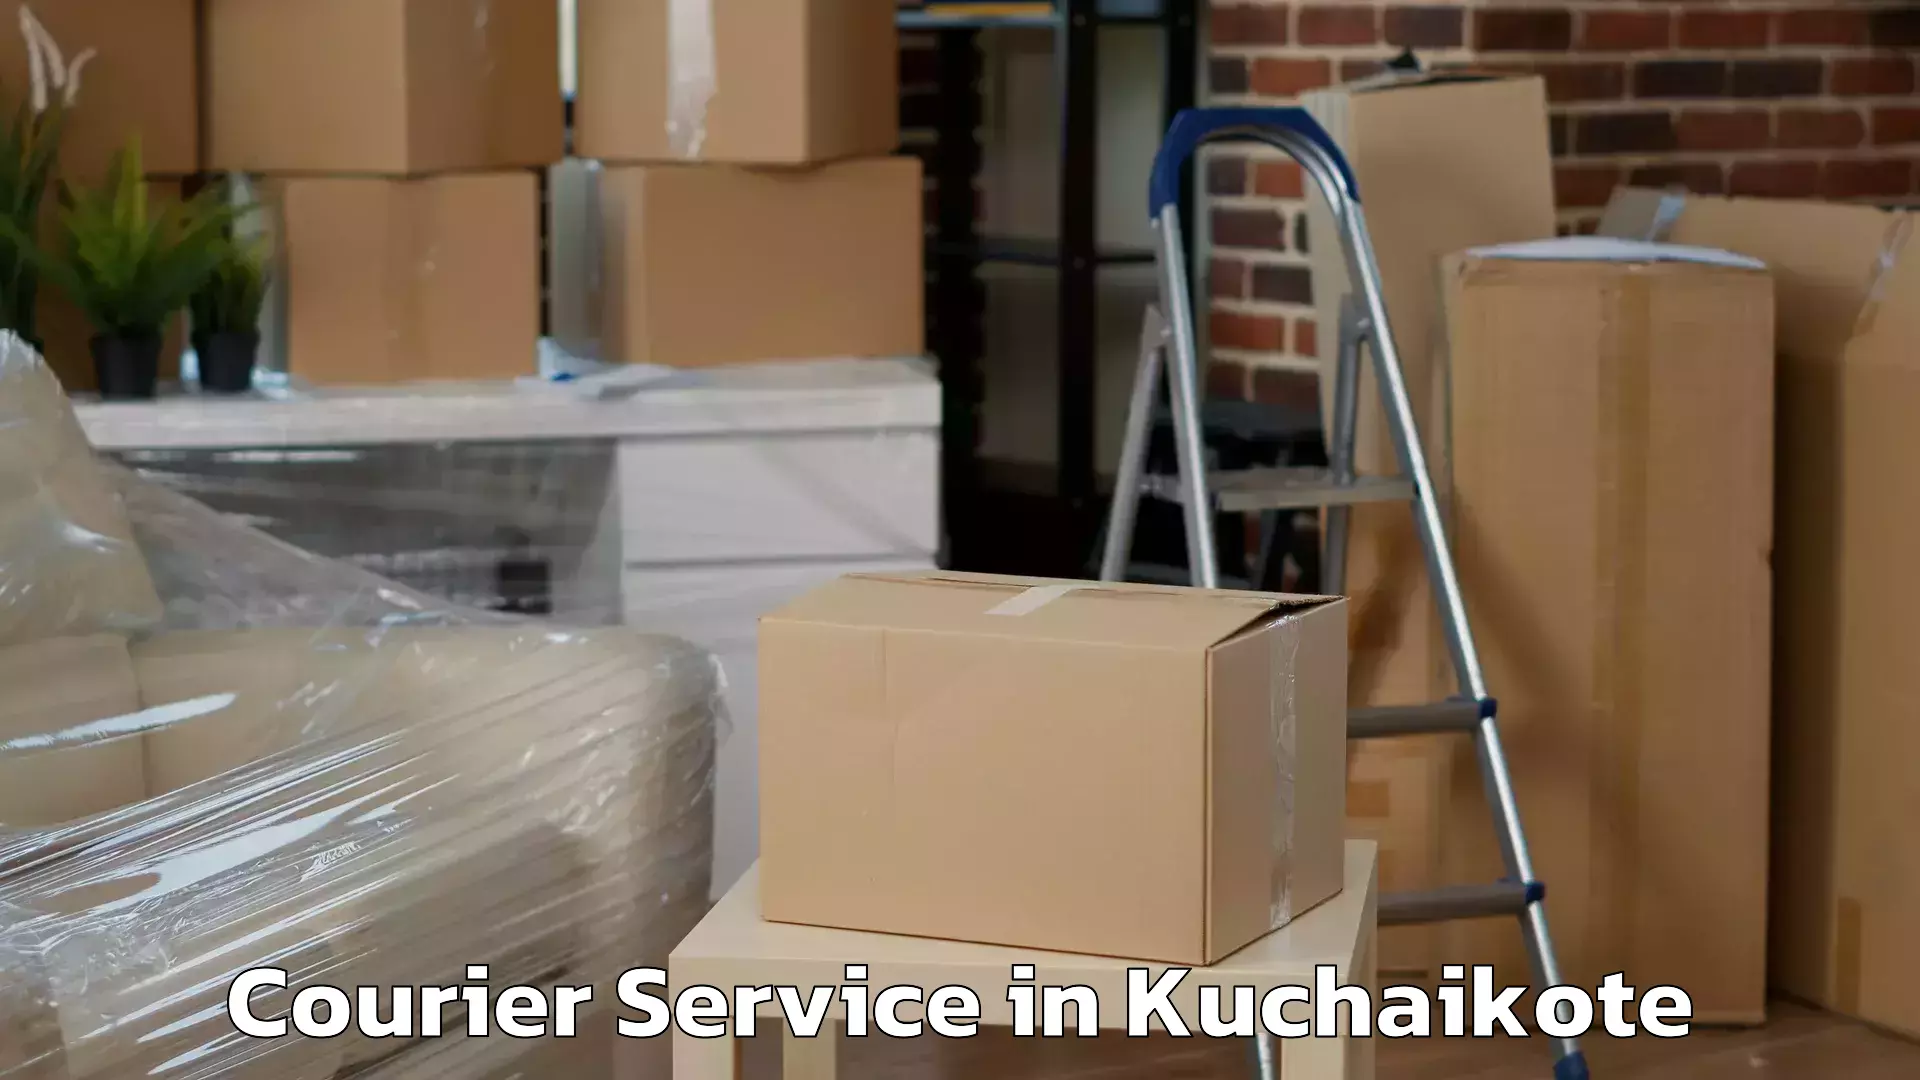 Rapid shipping services in Kuchaikote